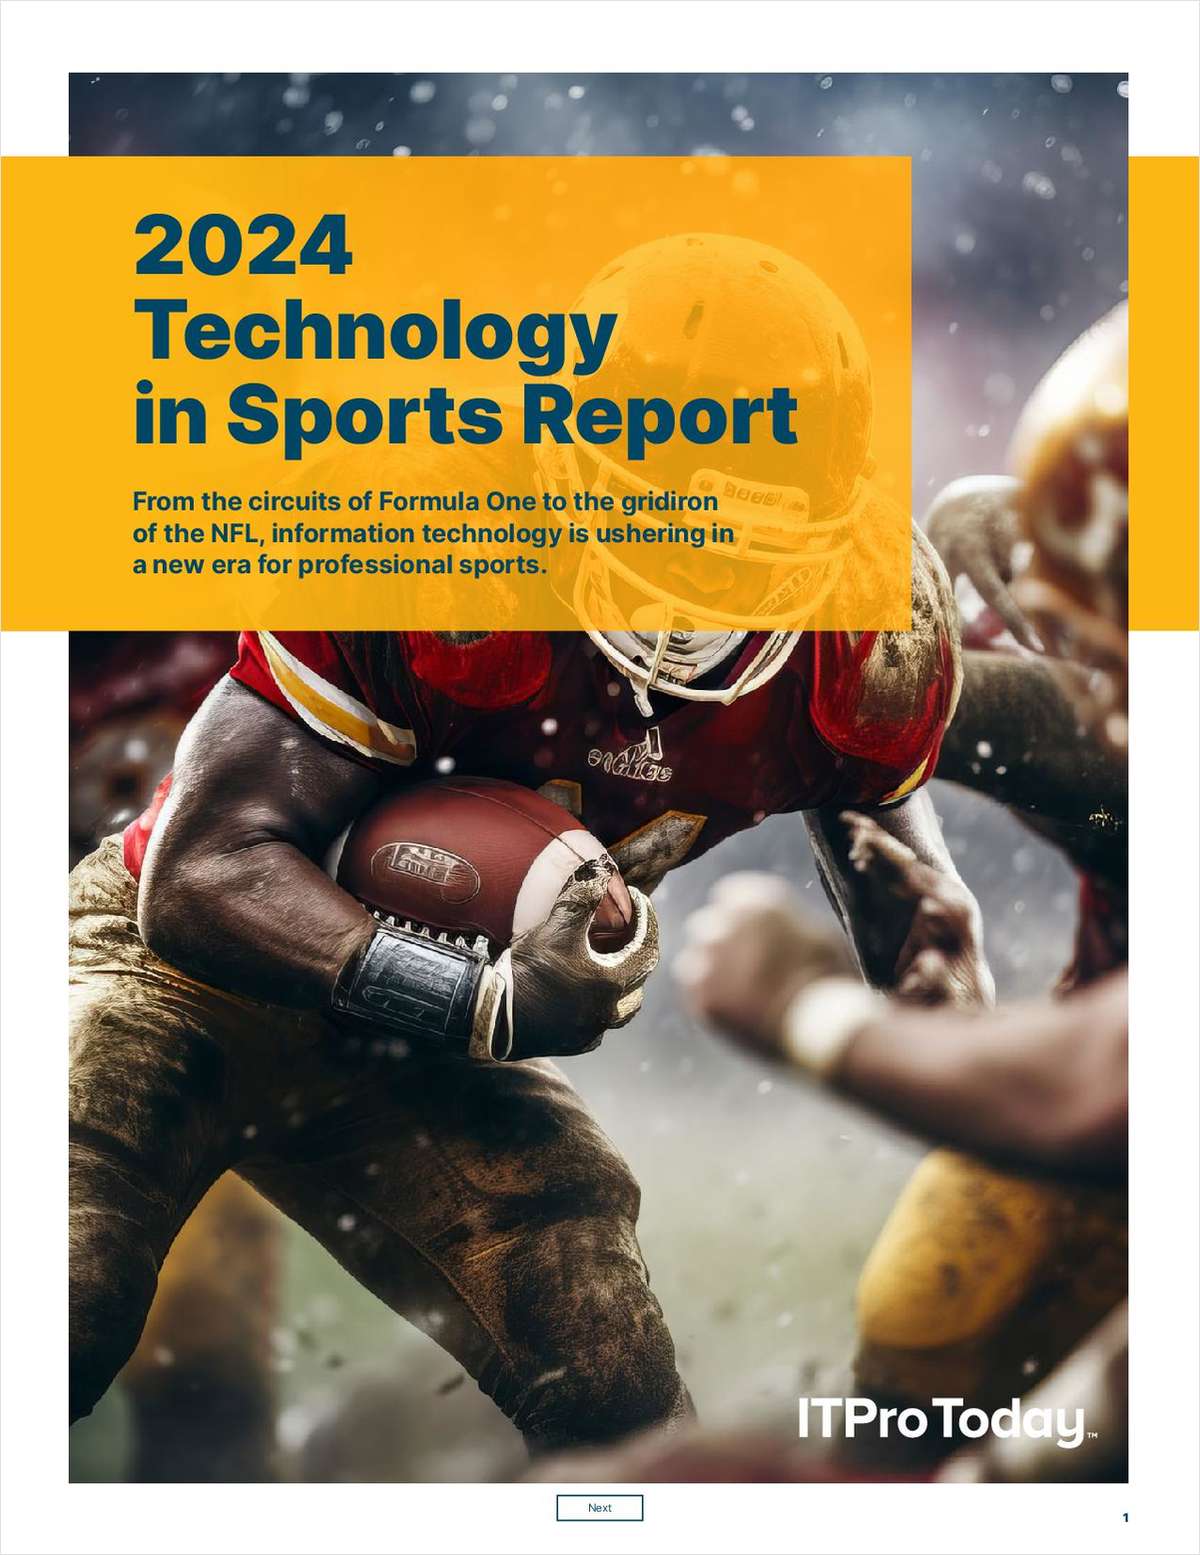 2024 Technology in Sports Report